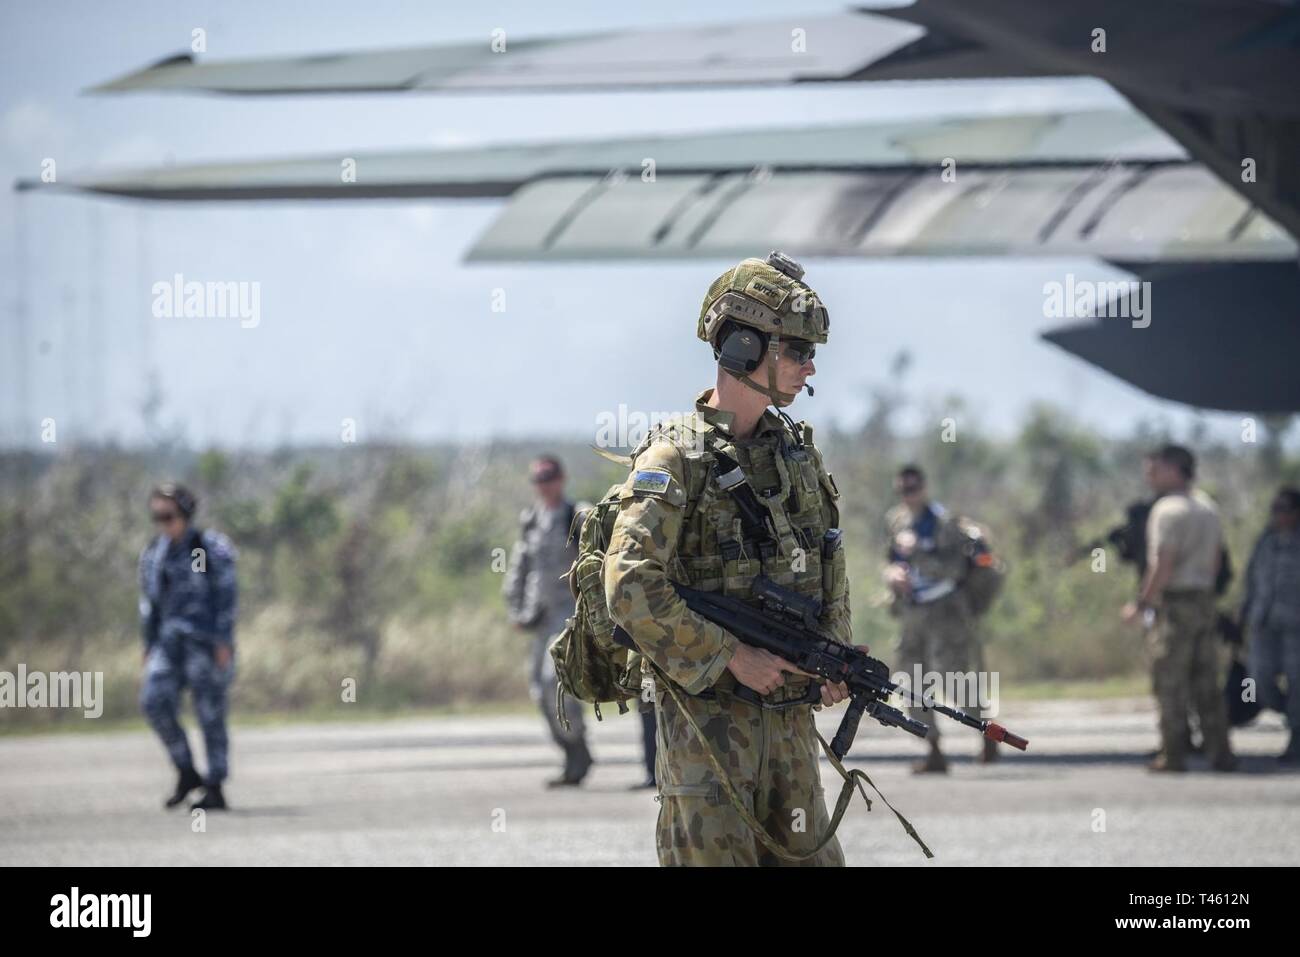 A Royal Australian Air Force member provides security for passengers exiting a plane at Tinian, U.S. Commonwealth of the Northern Marianas Islands stands during exercise Cope North Feb. 19, 2019. Cope North is an annual multilateral U.S. Pacific Air Forces-sponsored field training exercise focused on combat air forces large-force employment and mobility air forces humanitarian assistance and disaster relief training to enhance interoperability among U.S., Australian and Japanese forces. Stock Photo